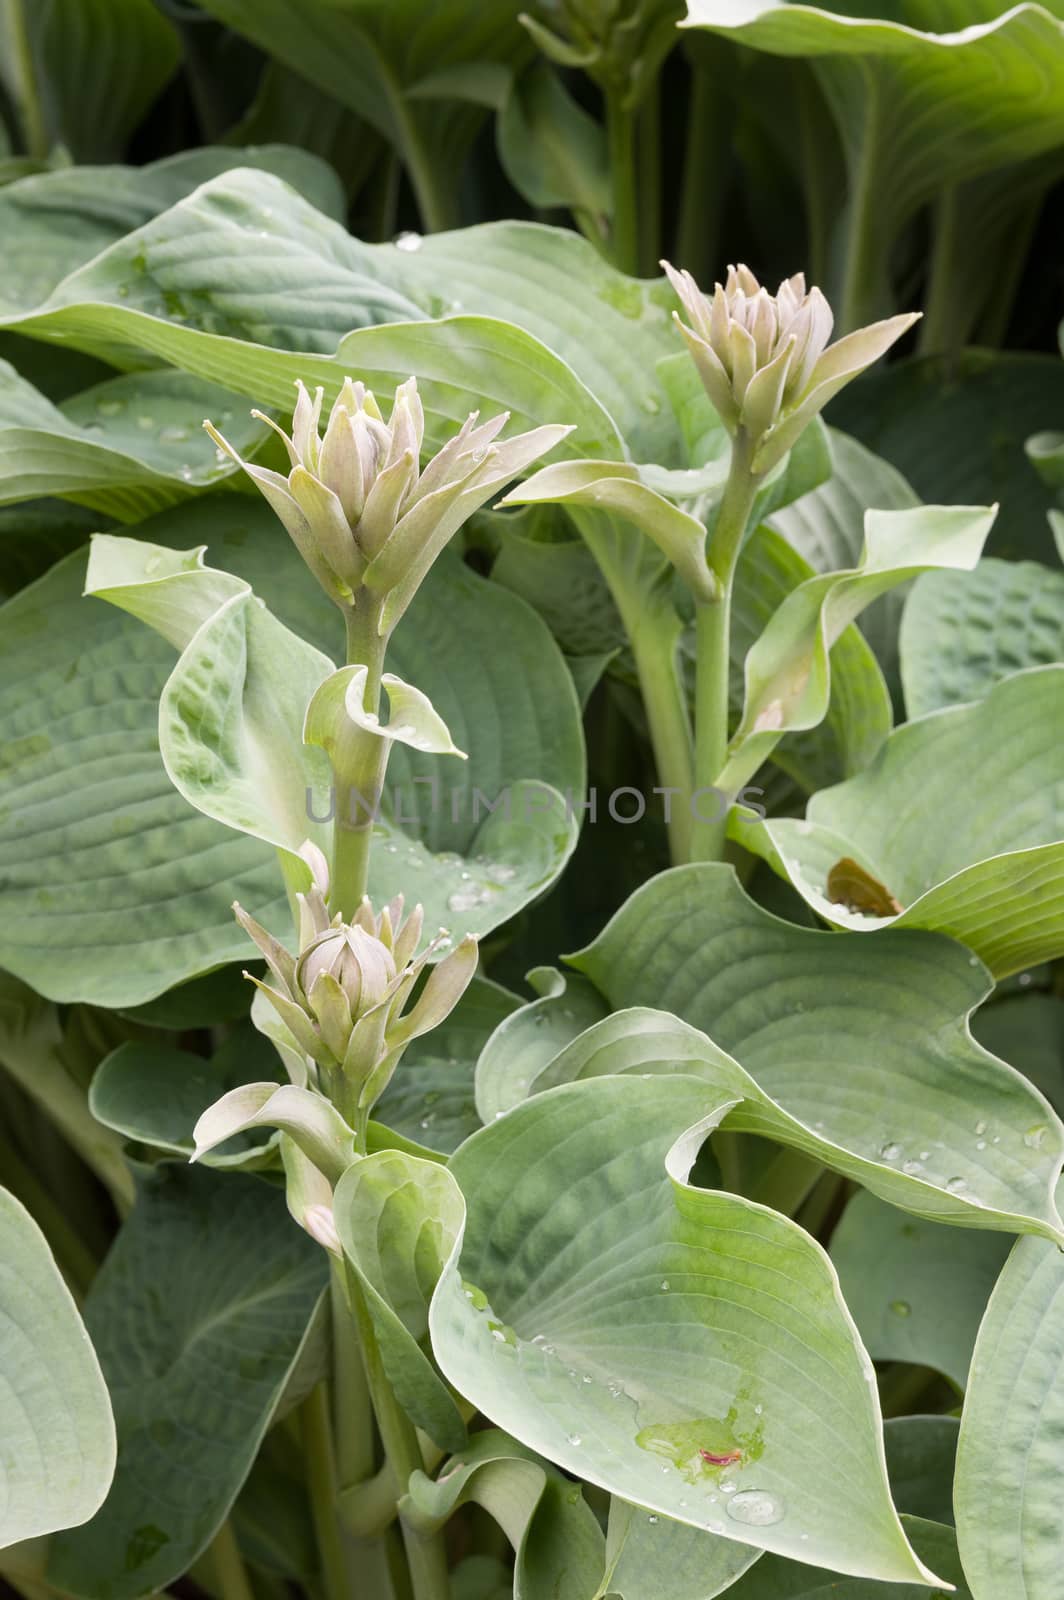 Hosta is a genus of plants commonly known as hostas, plantain lilies and occasionally by the Japanese name giboshi. Hostas are widely cultivated as shade-tolerant foliage plants.